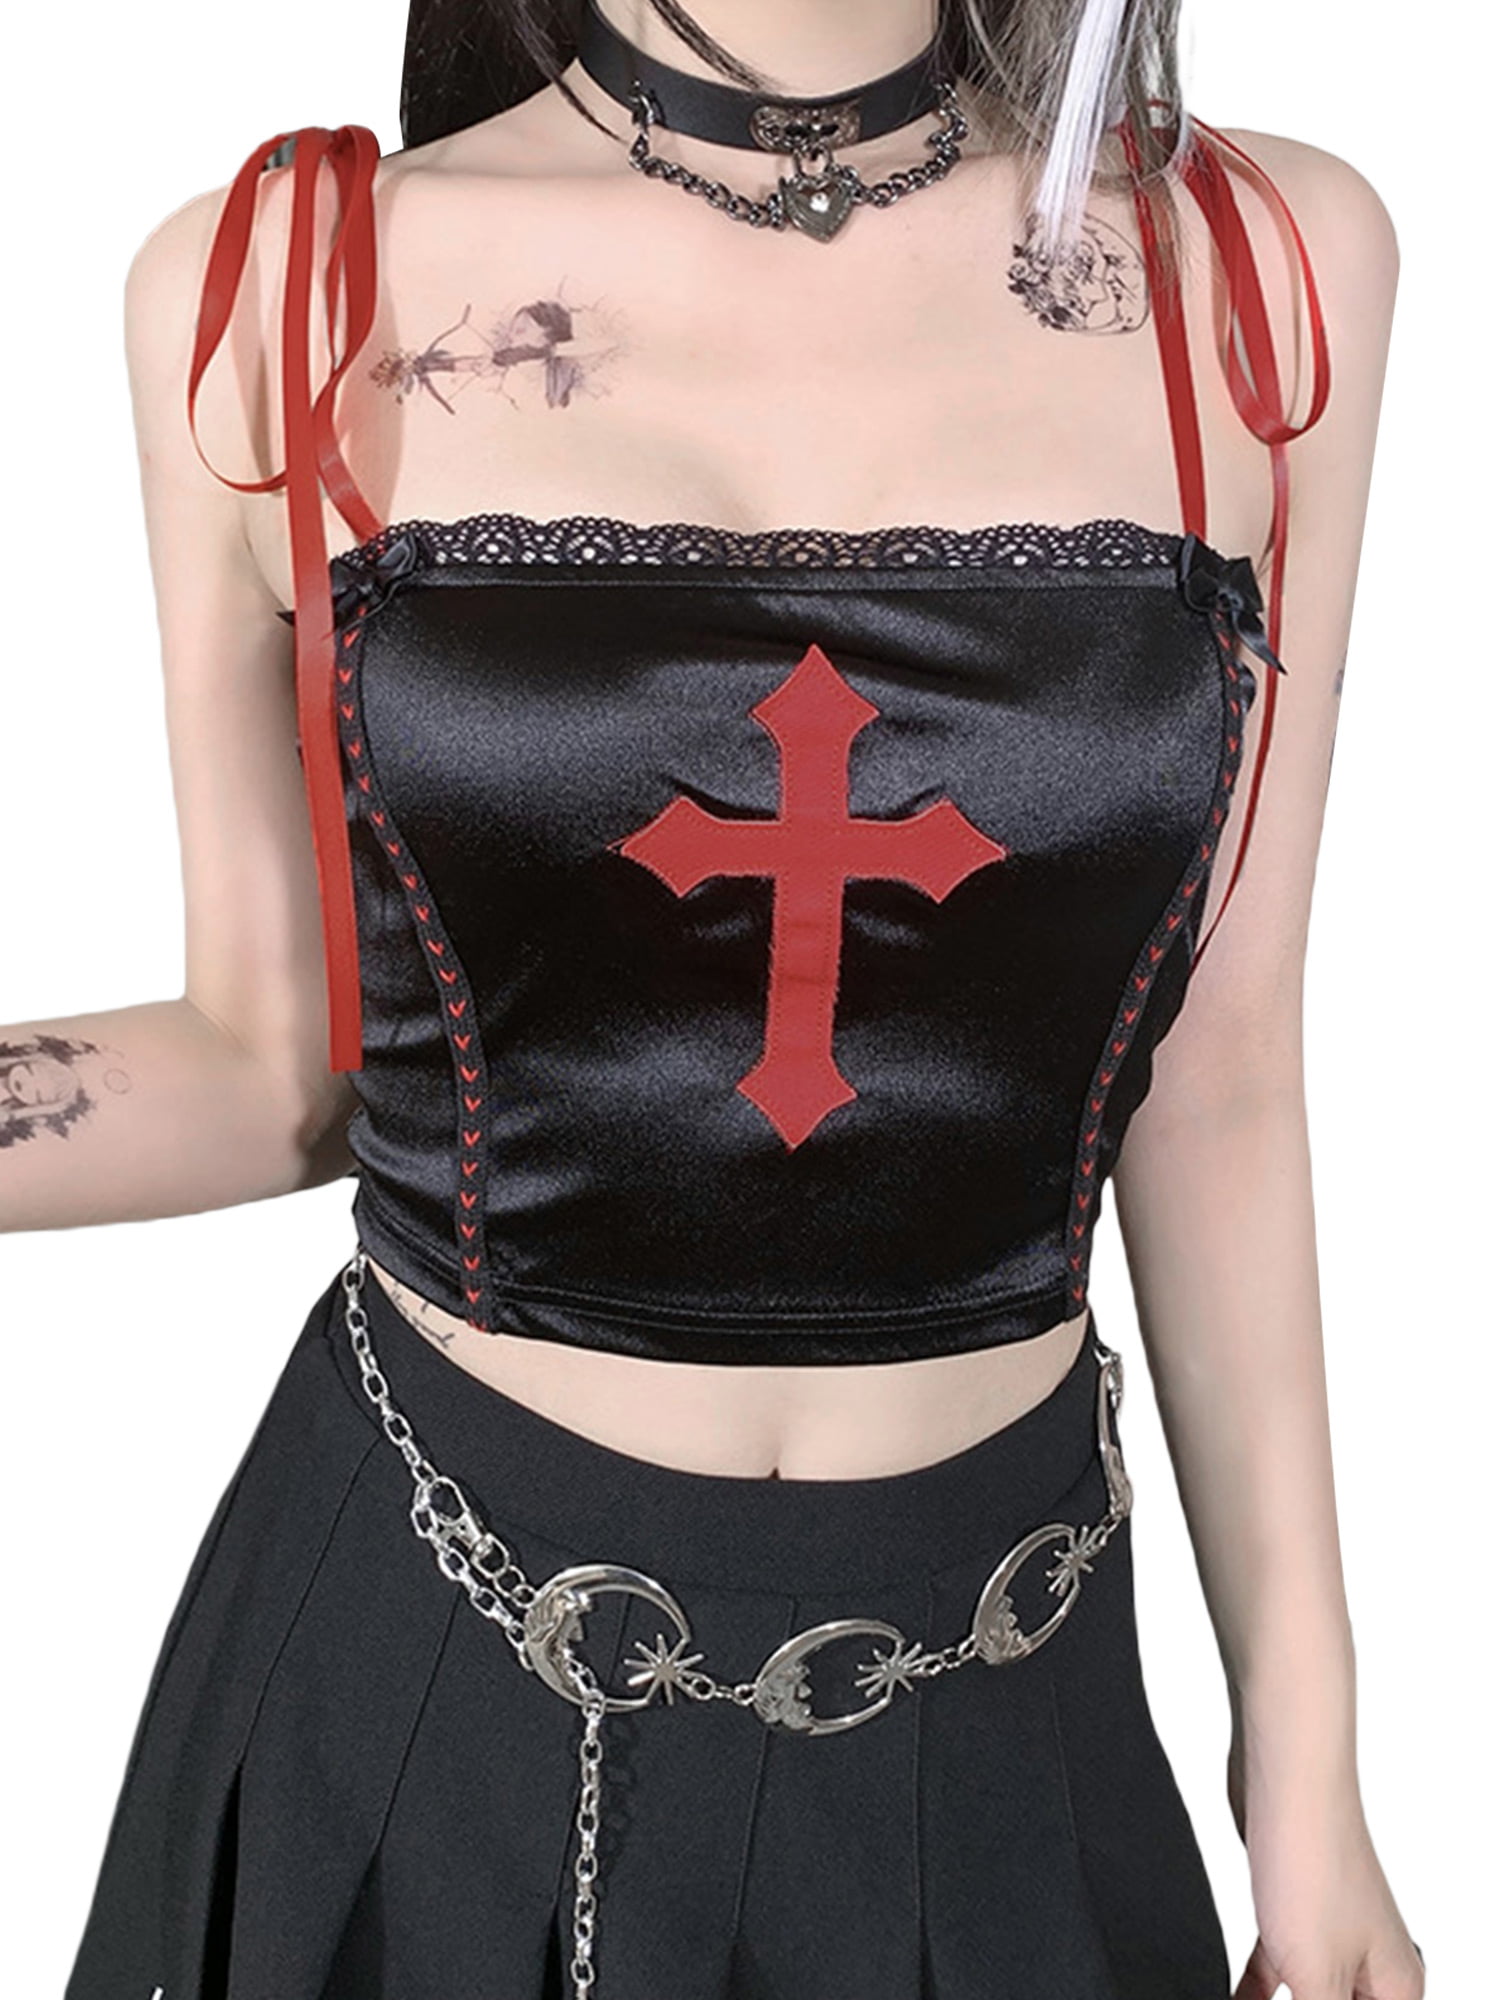 Musuos Vintage Gothic Crop Top for Women Grunge Dark Aesthetic Harajuku  Tank Tops Mall Goth Emo Camisole Shirt 